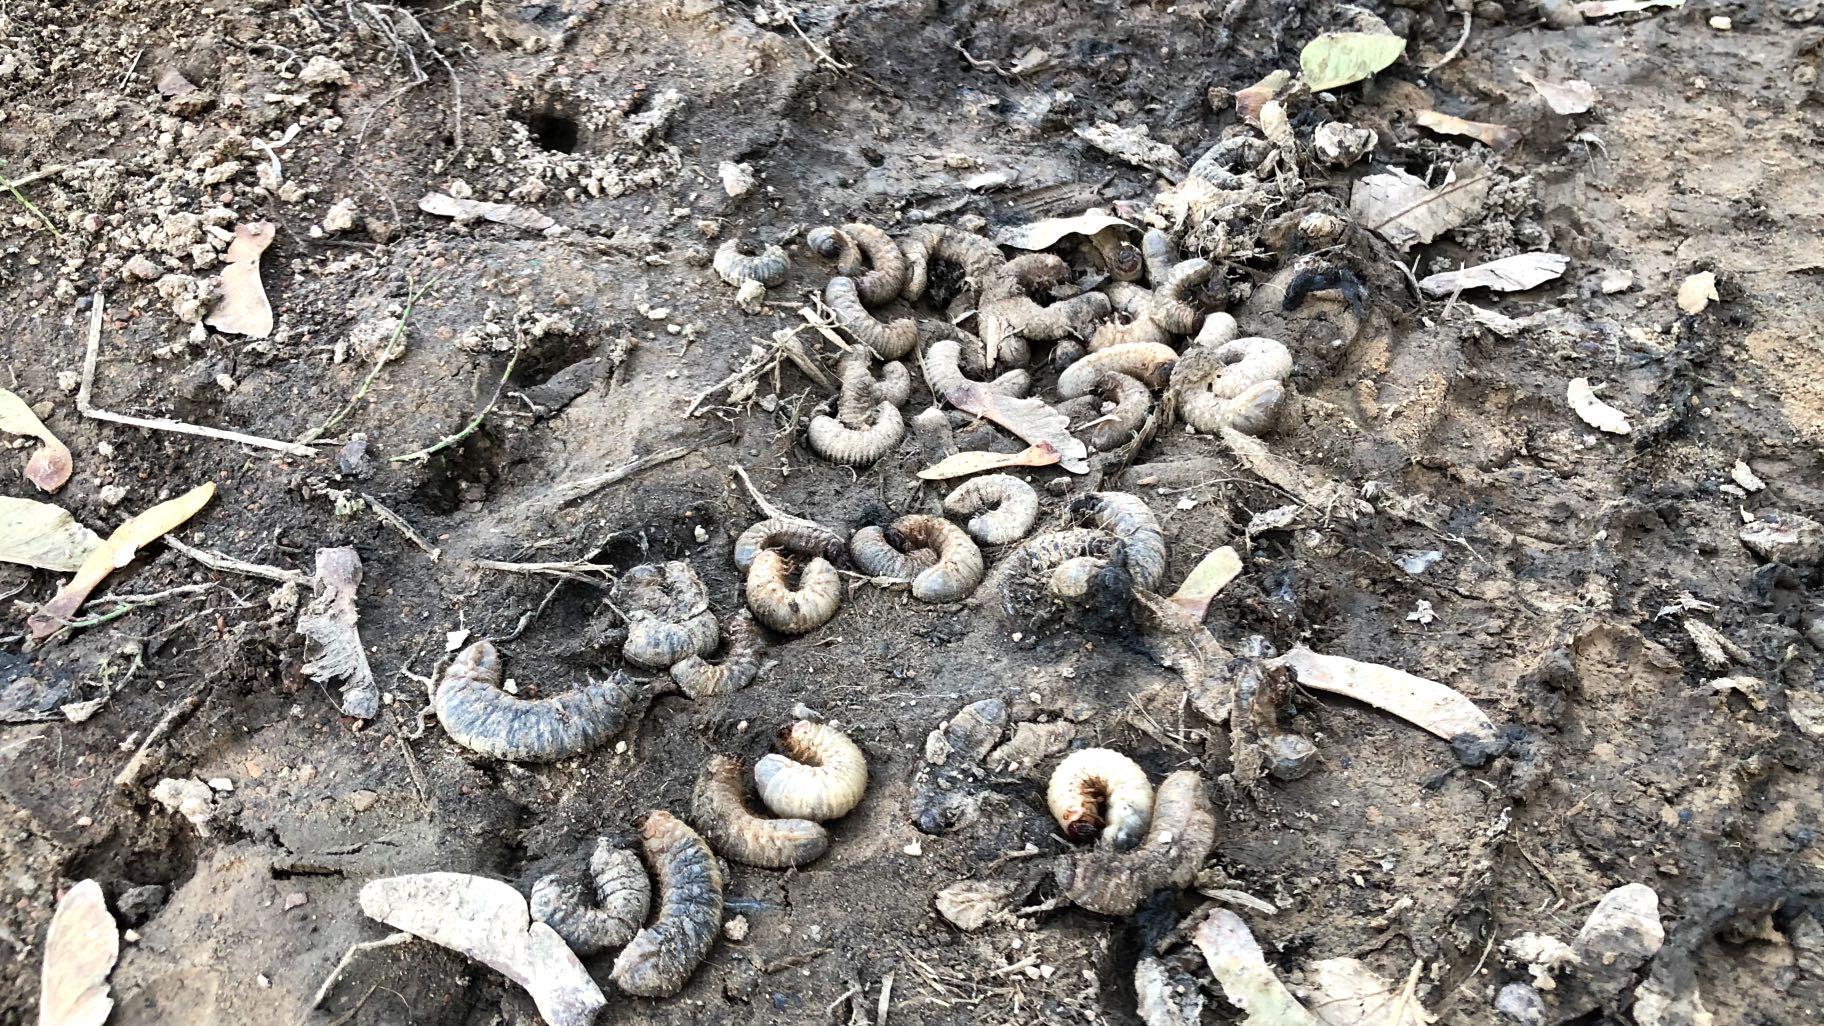 Grubs usually burrow underground during the fall and winter. Why these emerged at Welles Park is a mystery. (Patty Wetli / WTTW News)